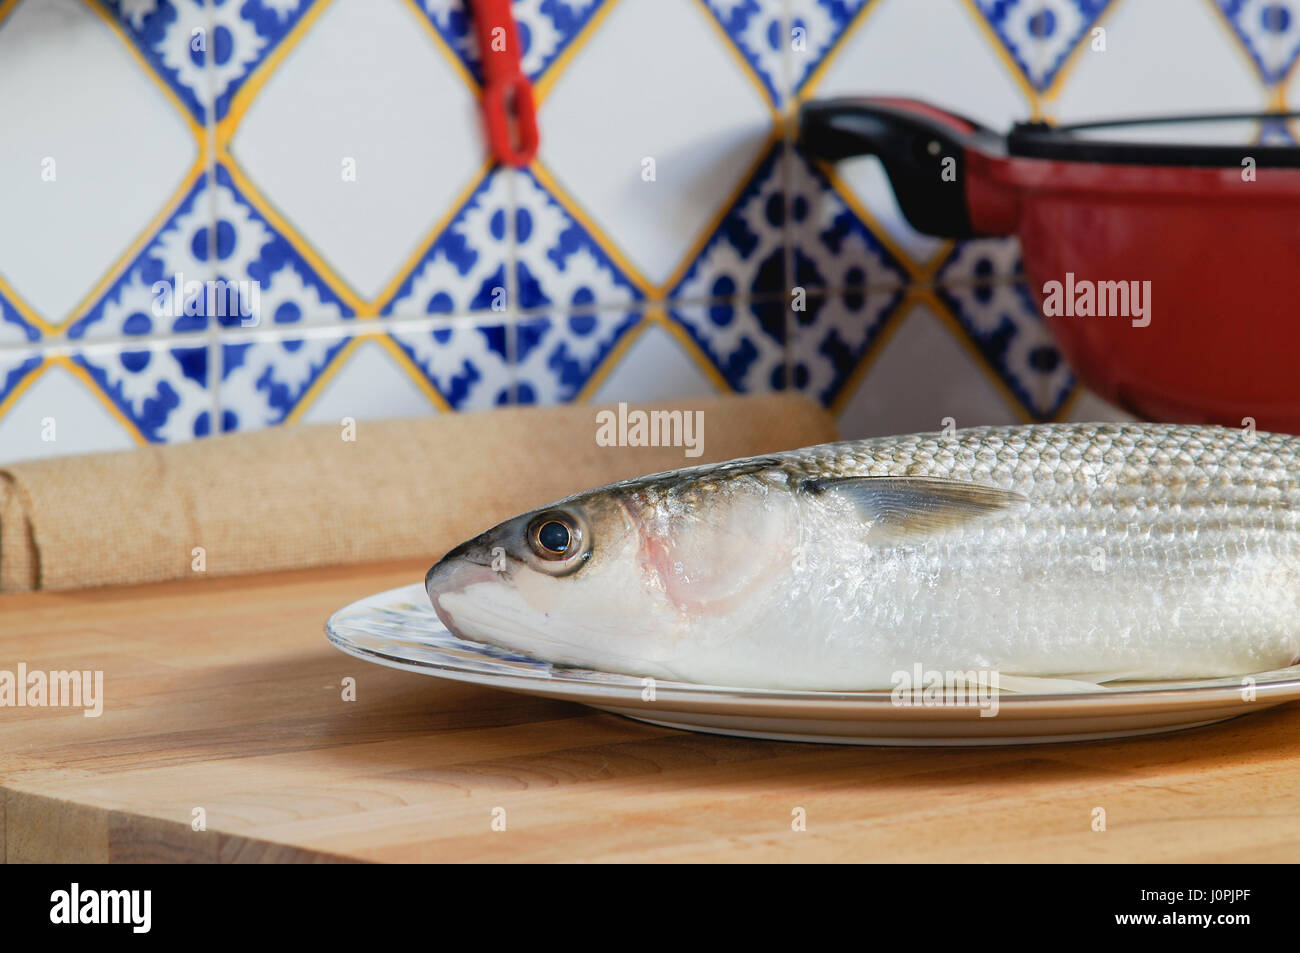 Mullet striped mullet contains omega-3 acids, vitamins and minerals. Mullet lying on plate ready for cooking. Stock Photo